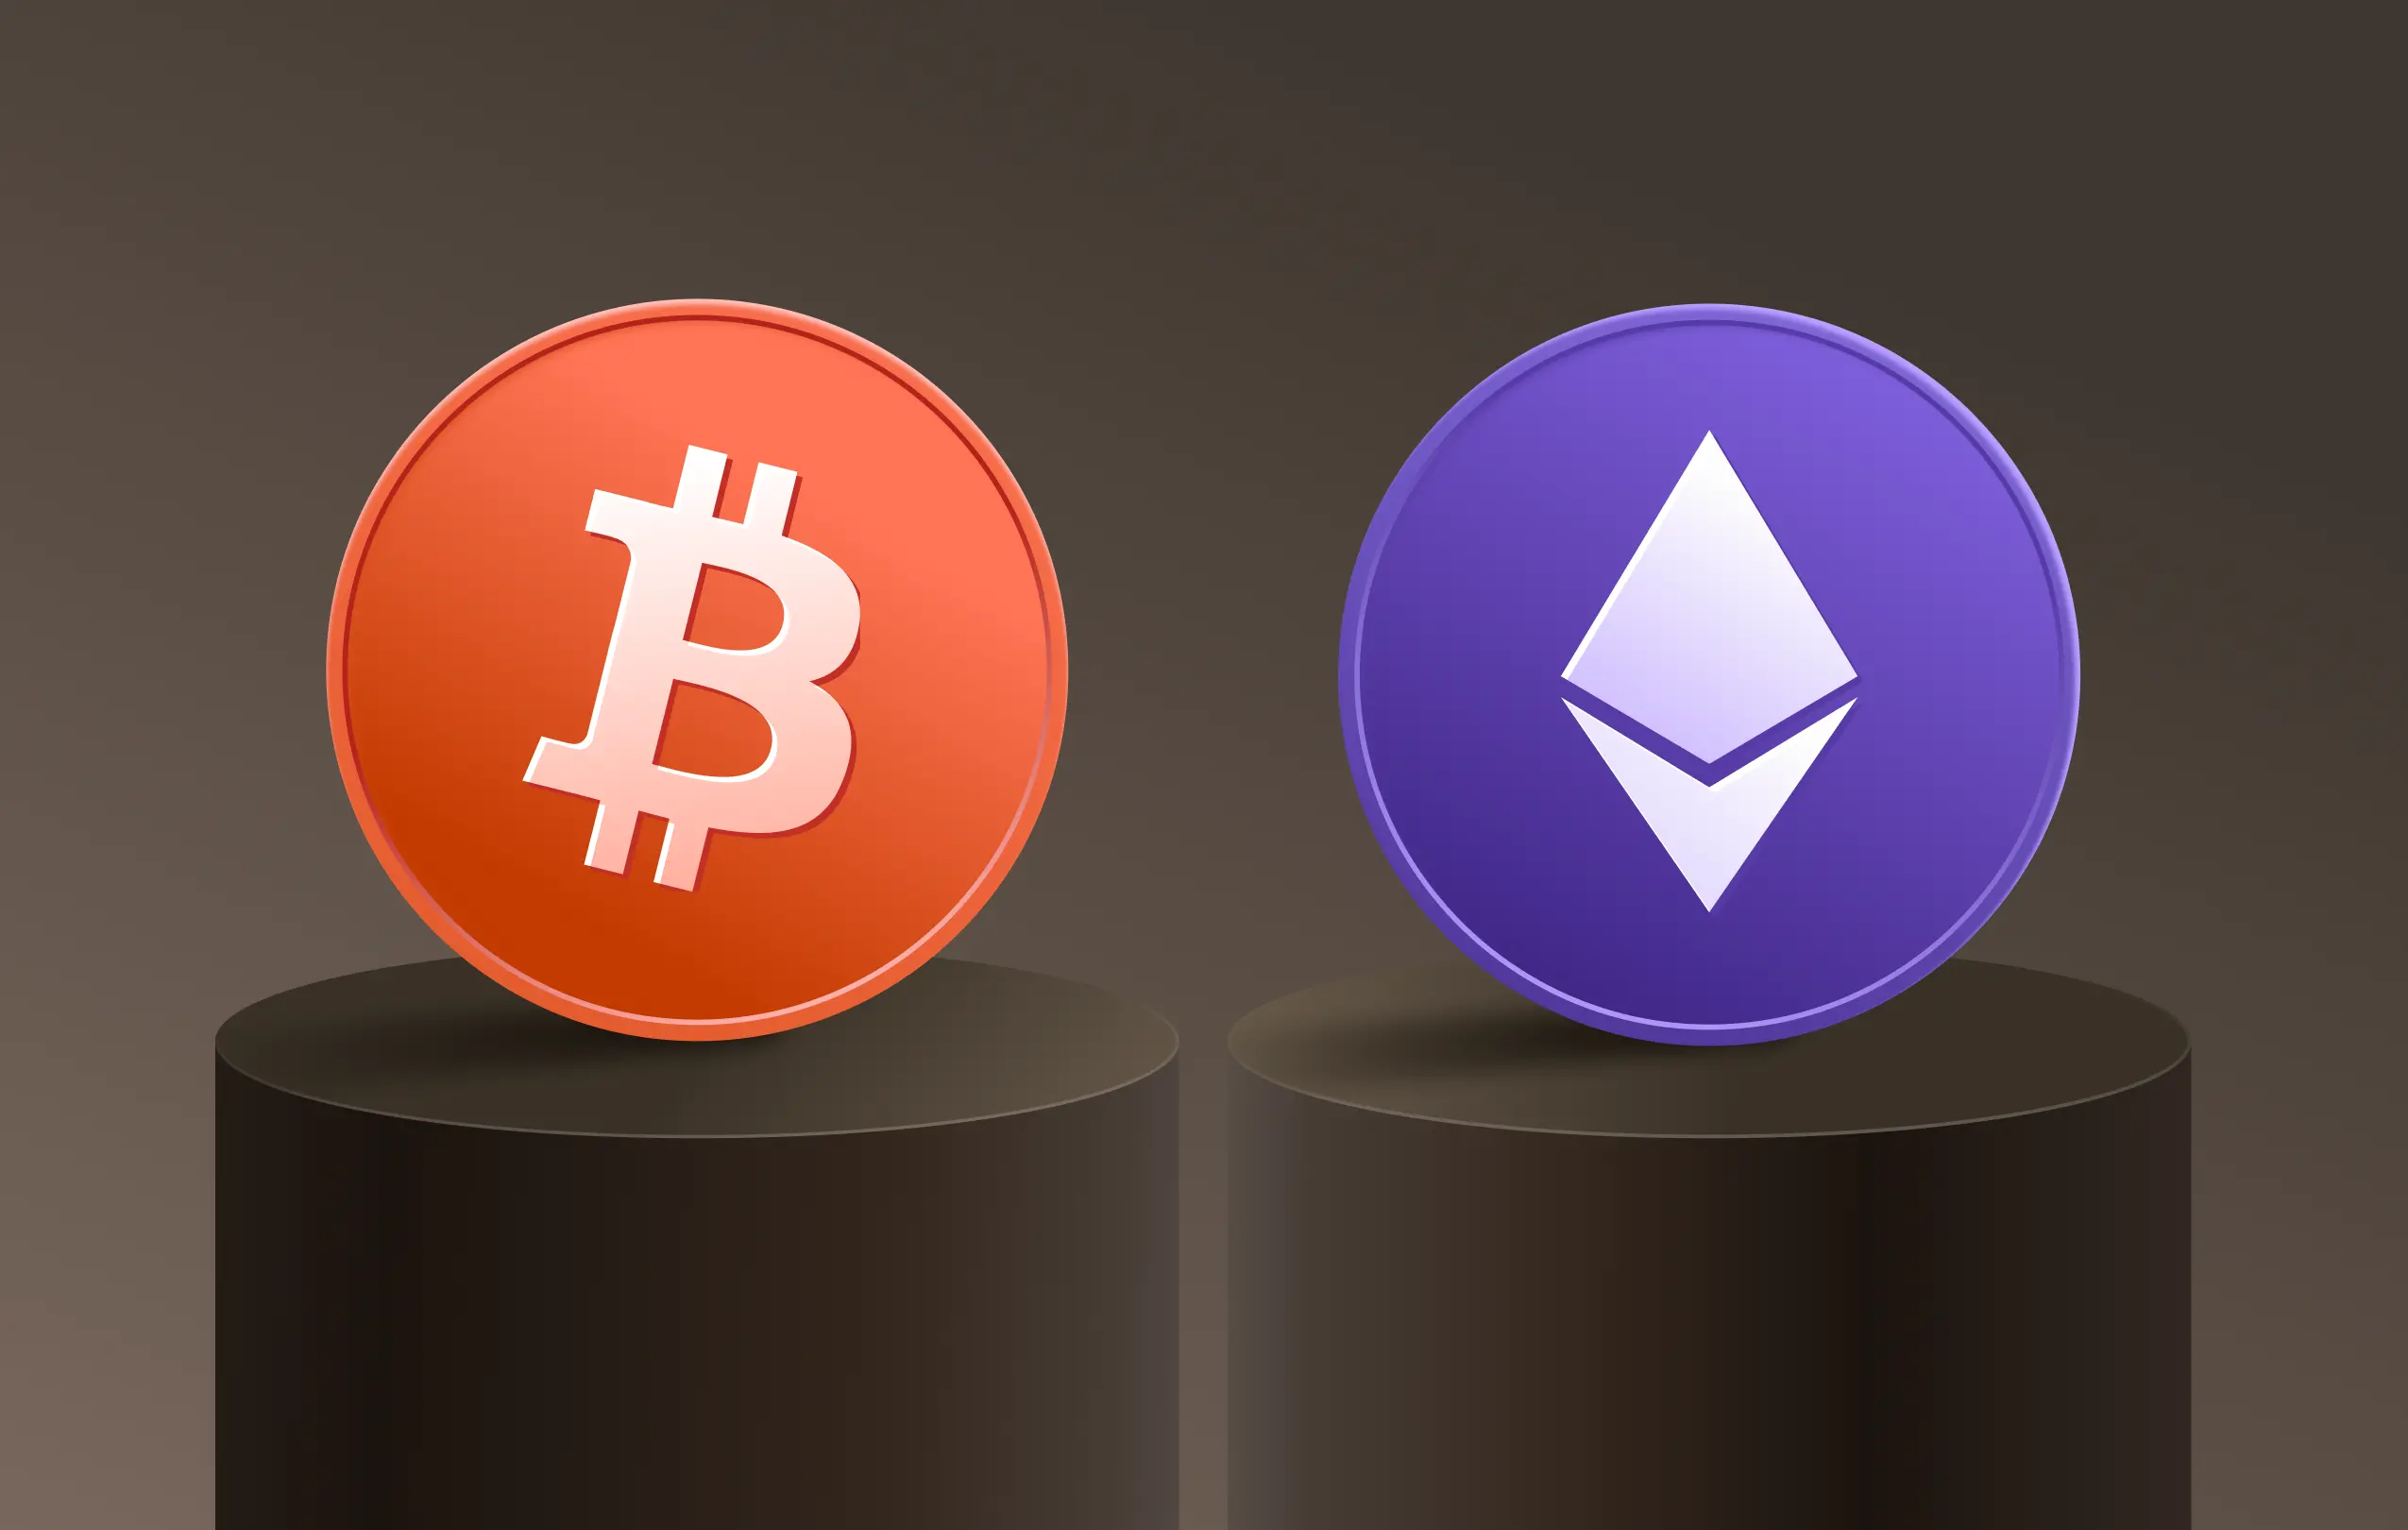 Bitcoin and Ethereum, similar yet different coins